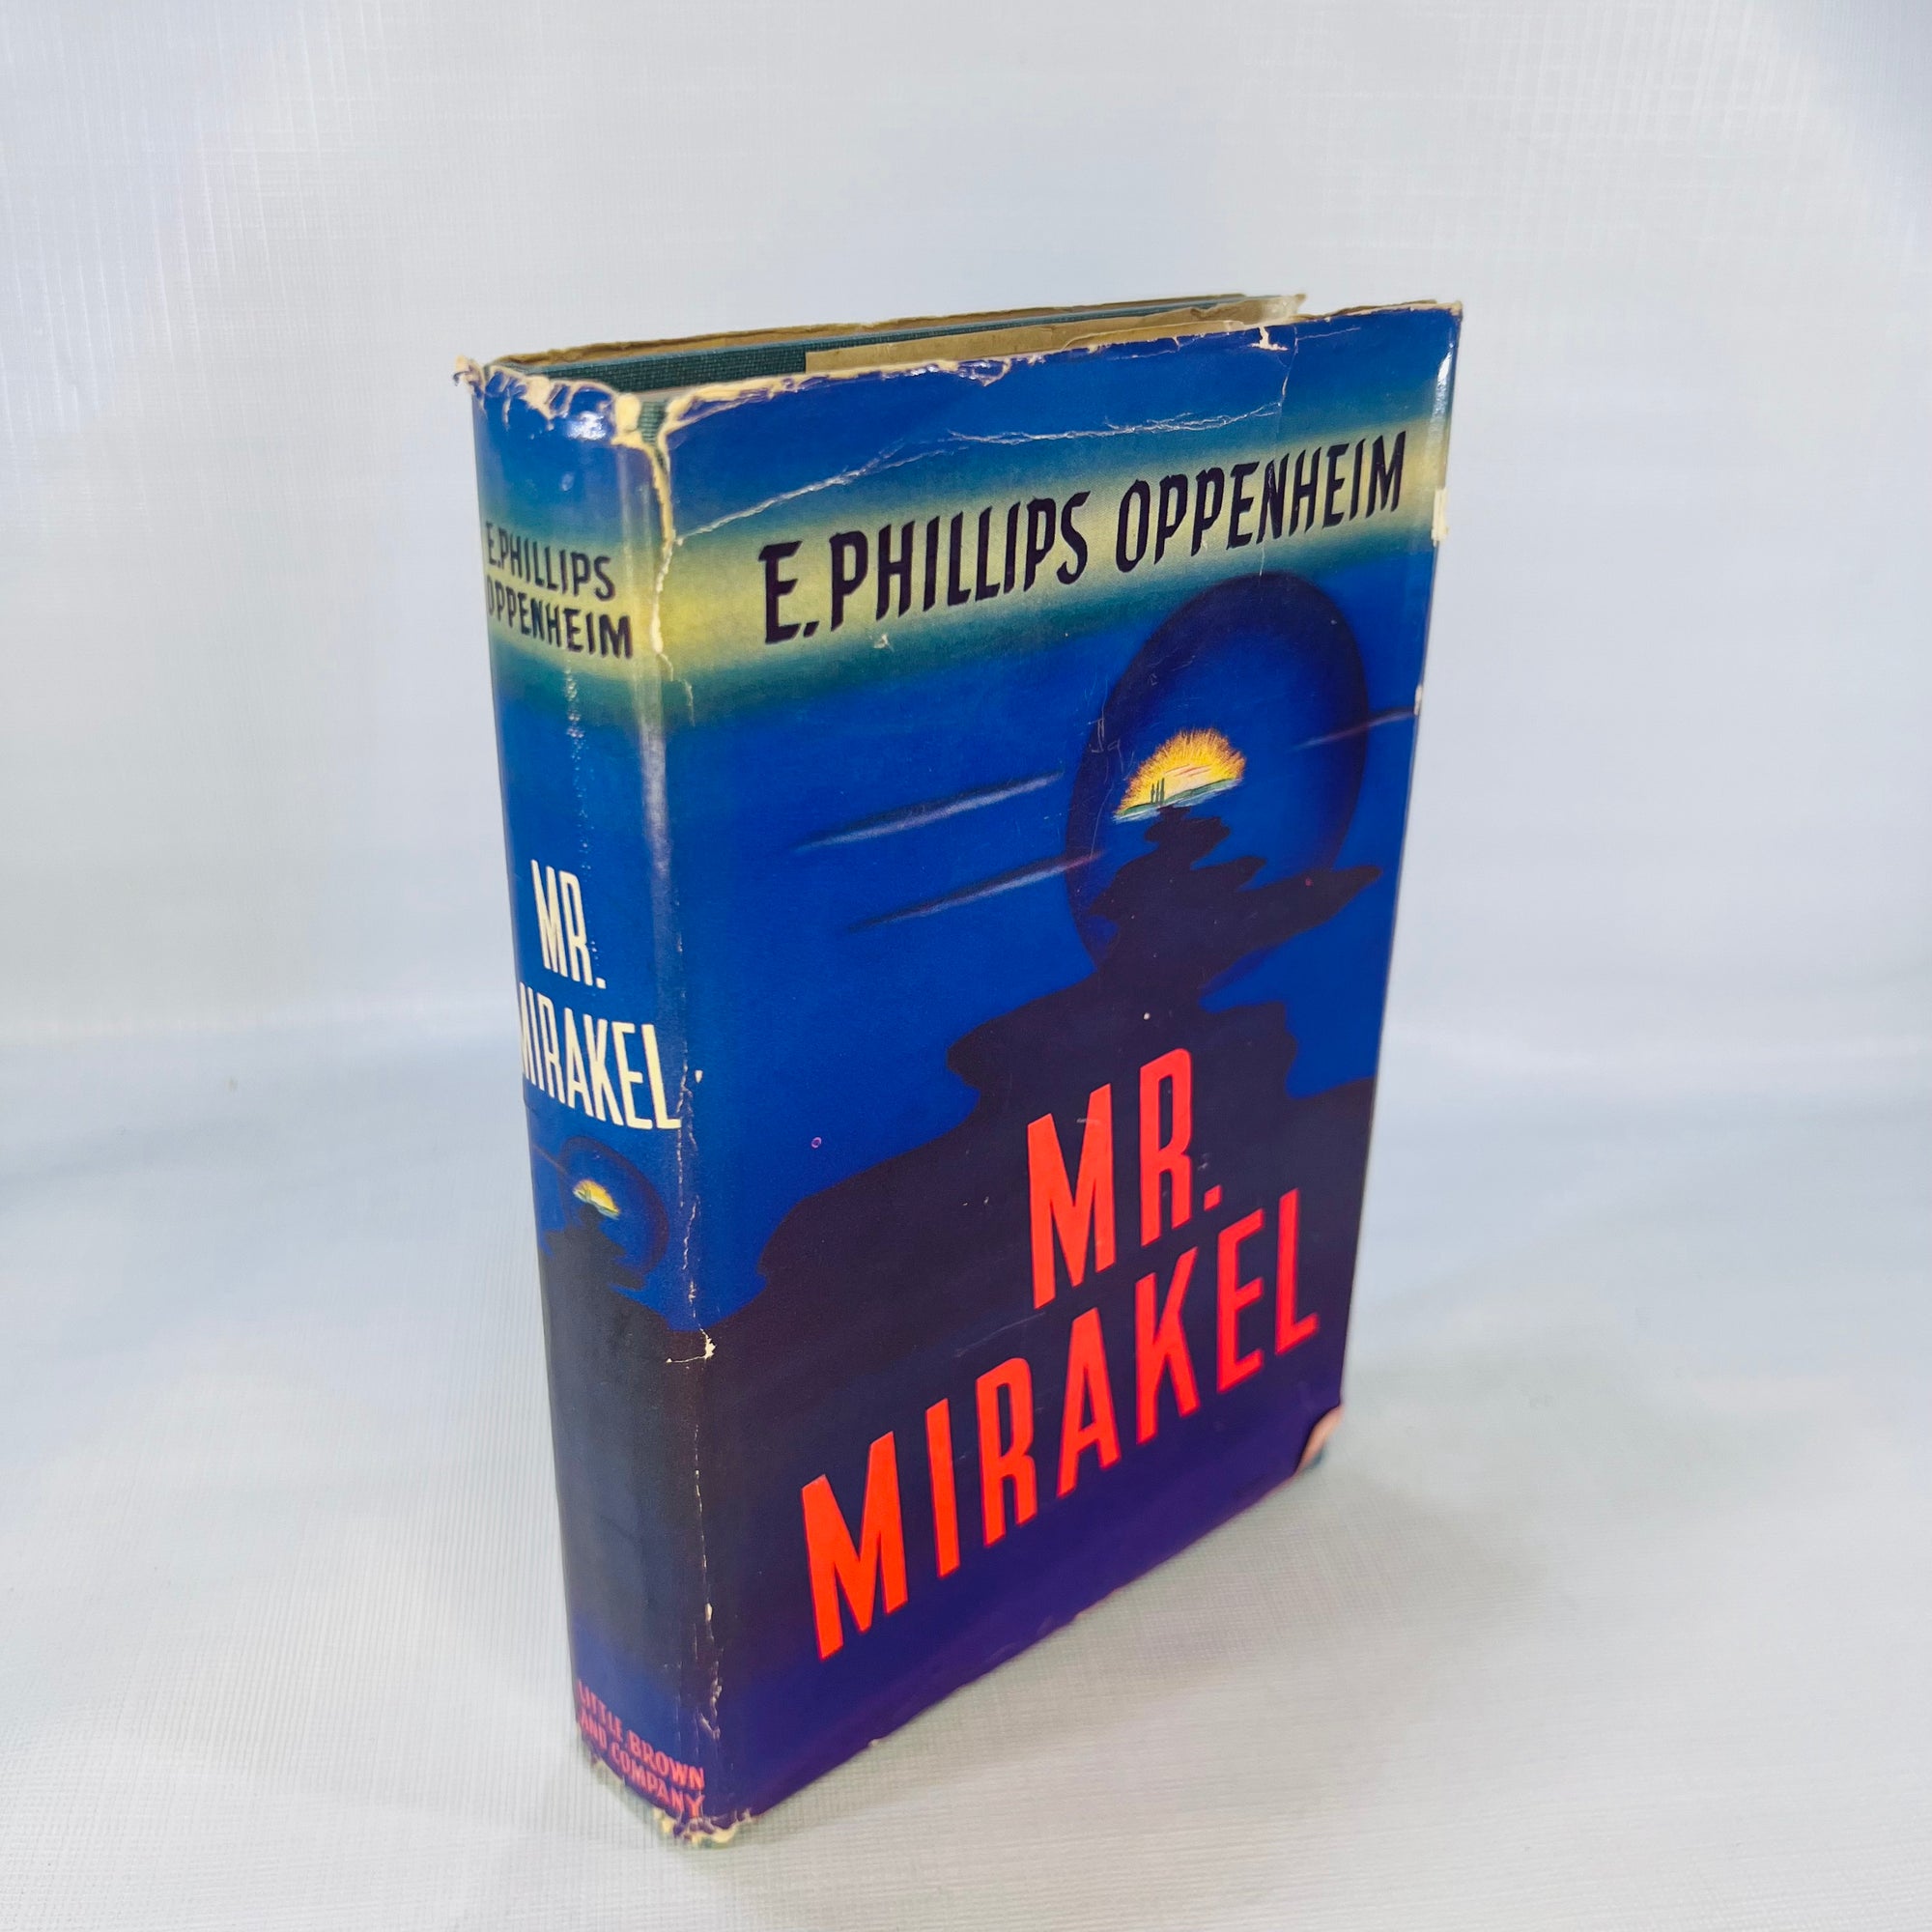 Mr. Mirakel by E. Phillips Oppenheim 1943 First Edition by Little Brown and Company